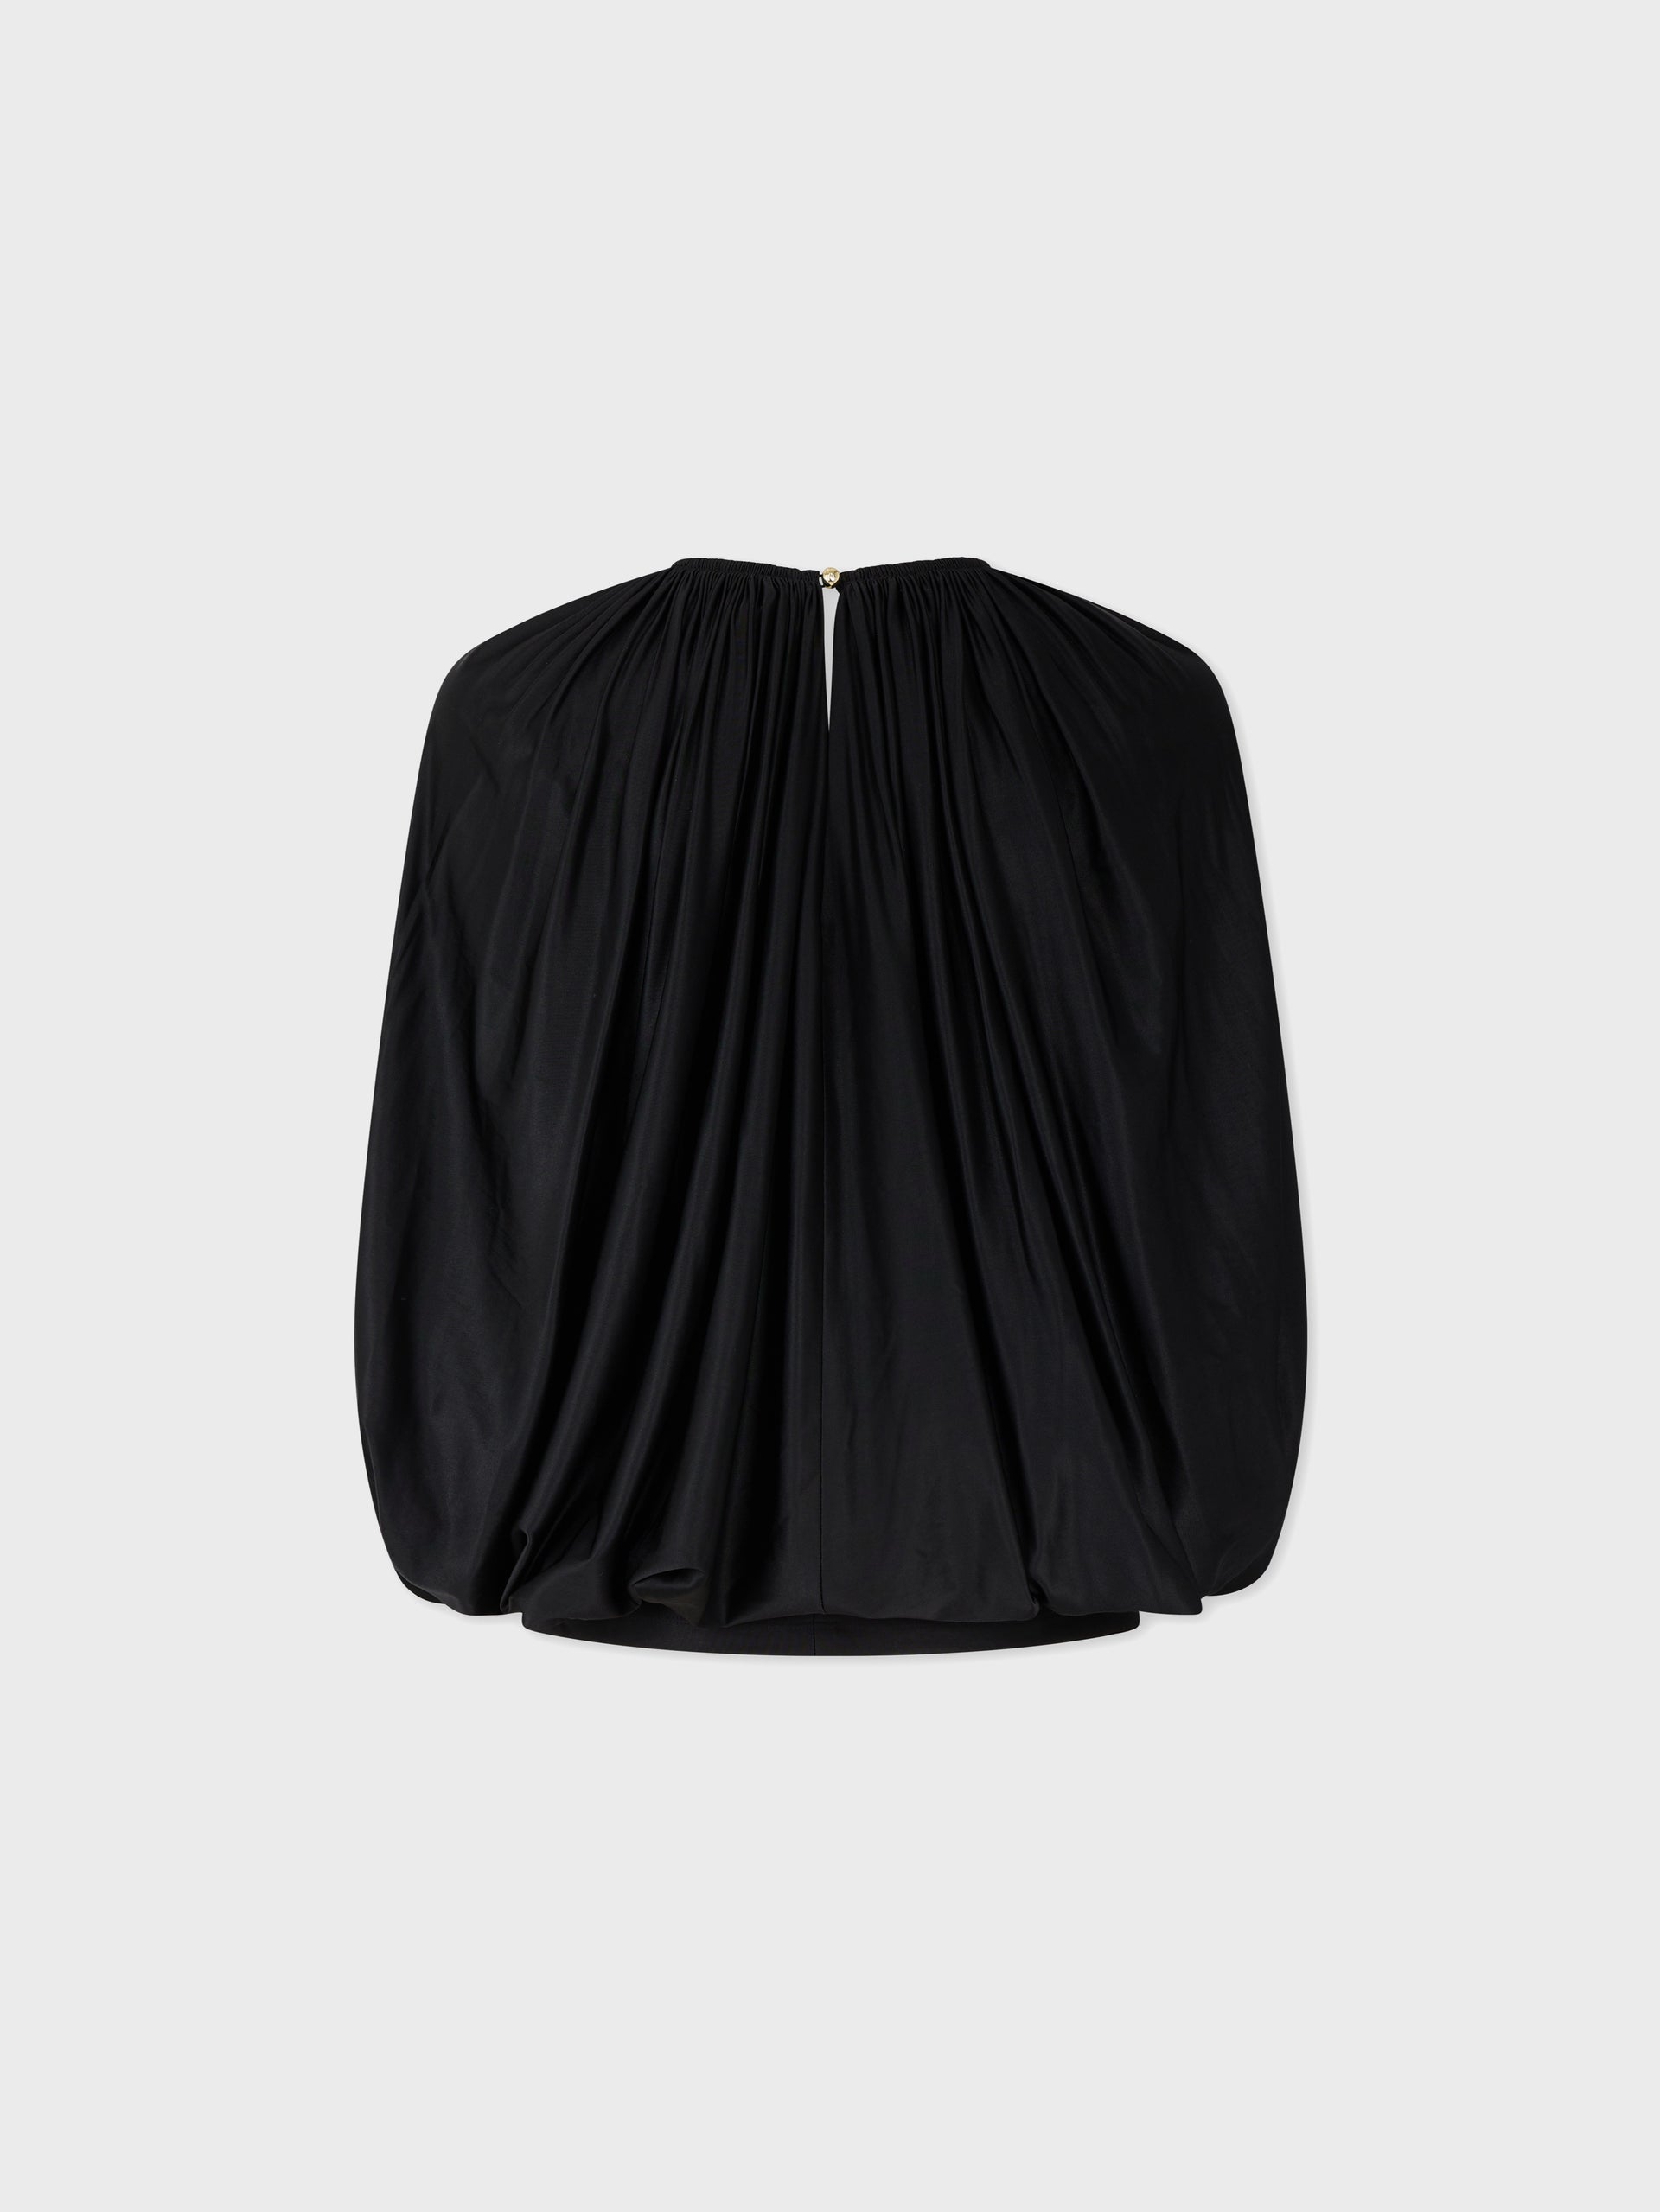 Black top with draping details